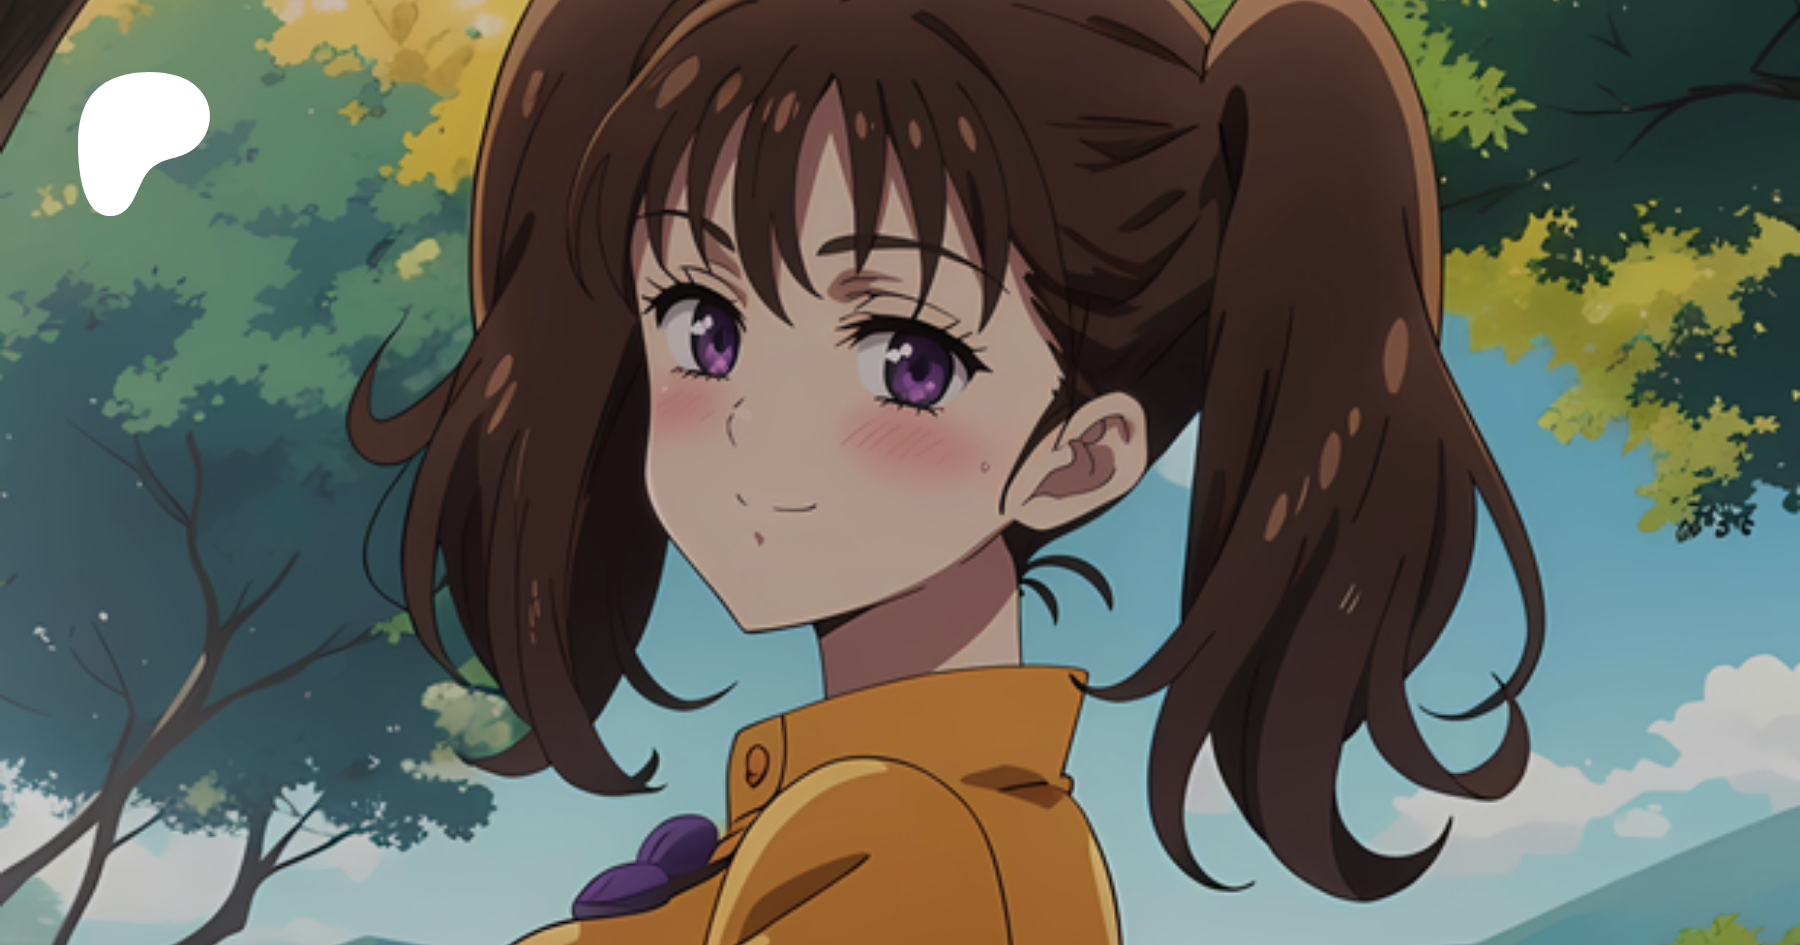 SFW images of Diane from one of the mangas I've made of her | Patreon